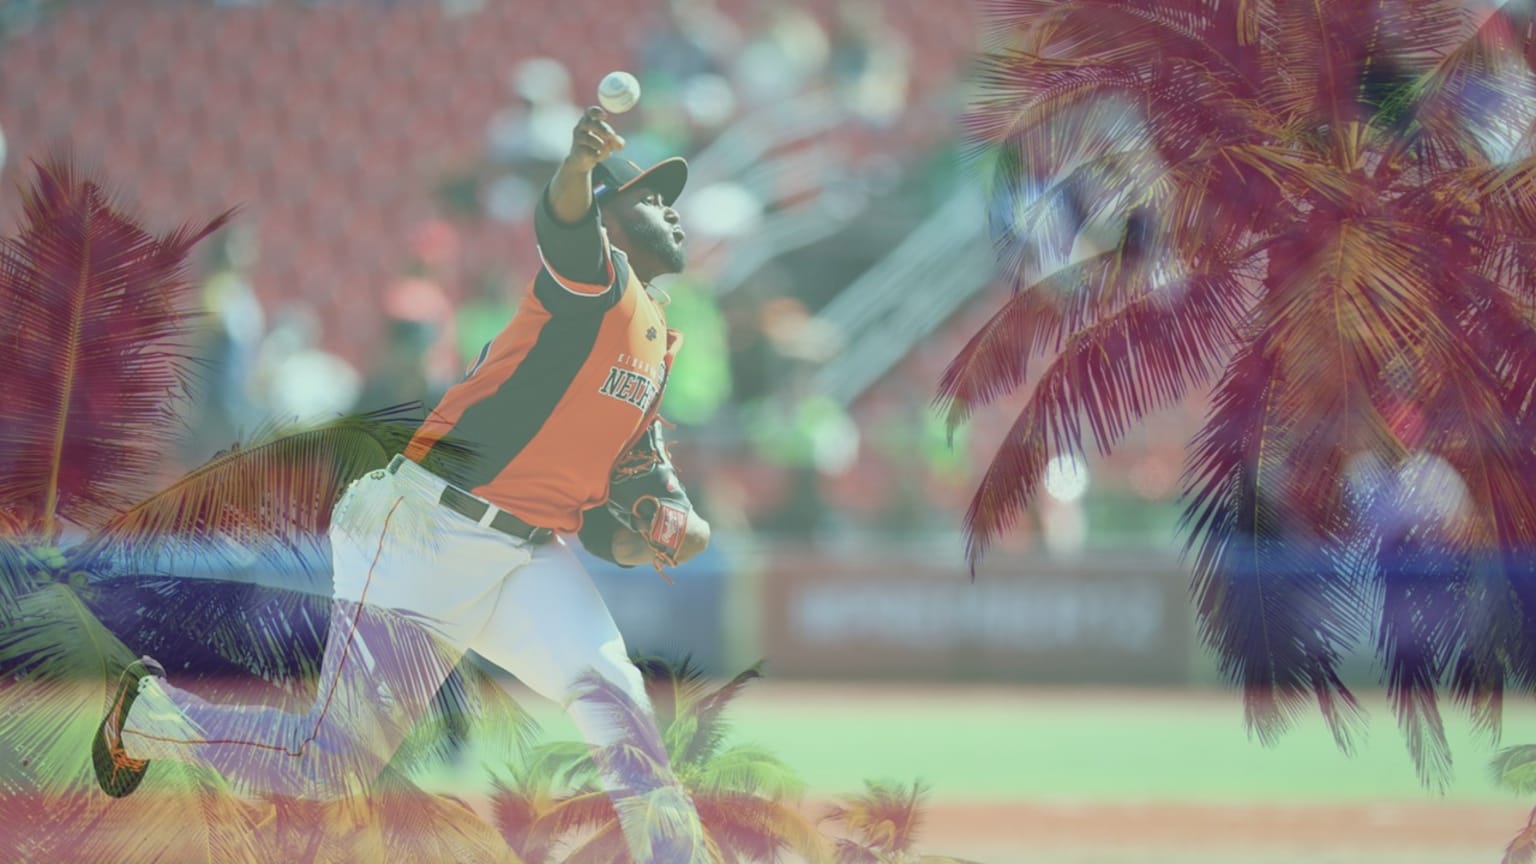 A photo of Netherlands pitcher Franklin Van Gurp is overlayed with palm trees